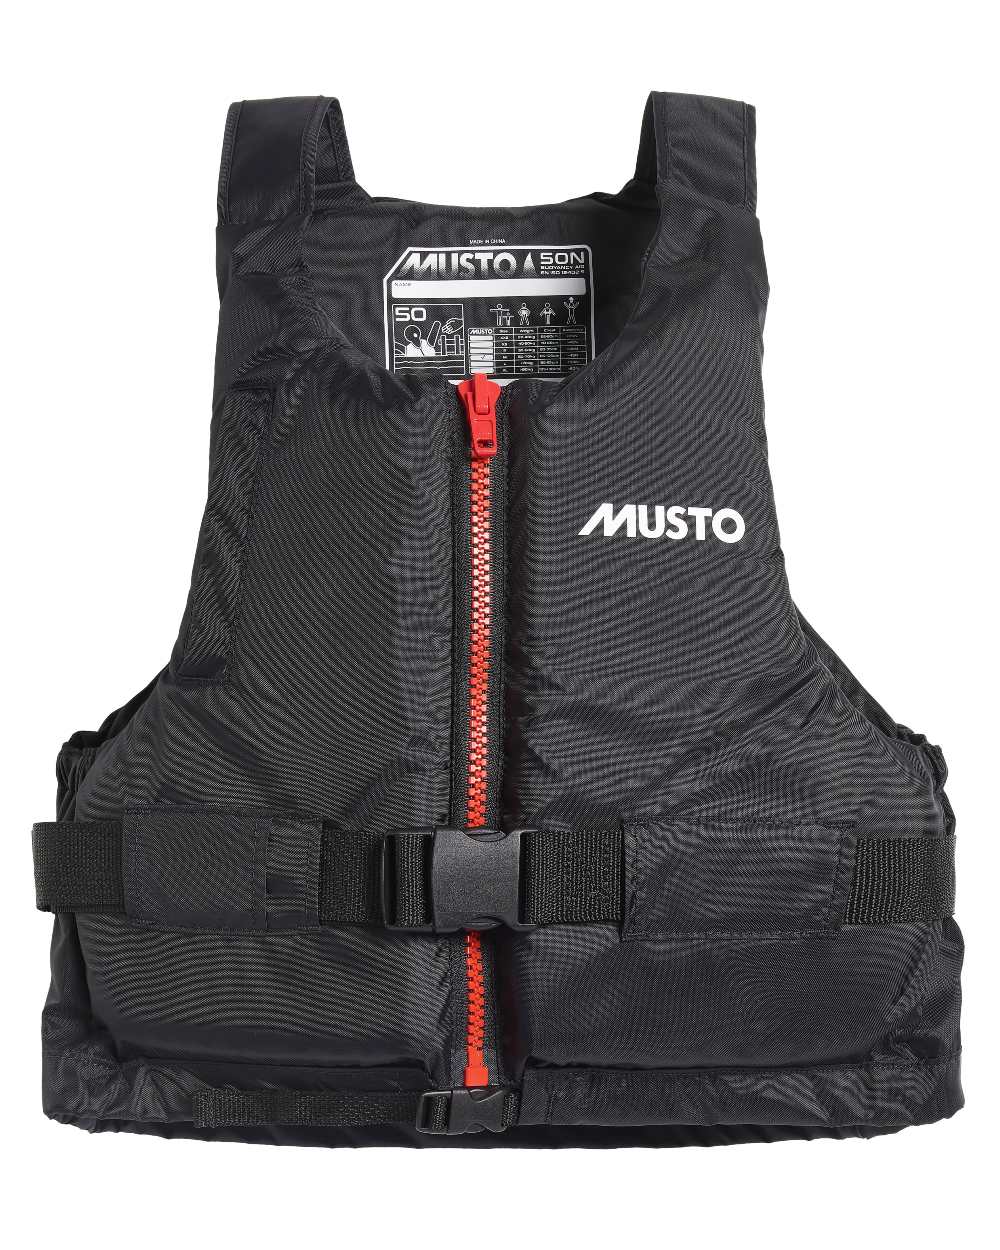 Black Coloured Musto Buoyancy Aid On A White Background 